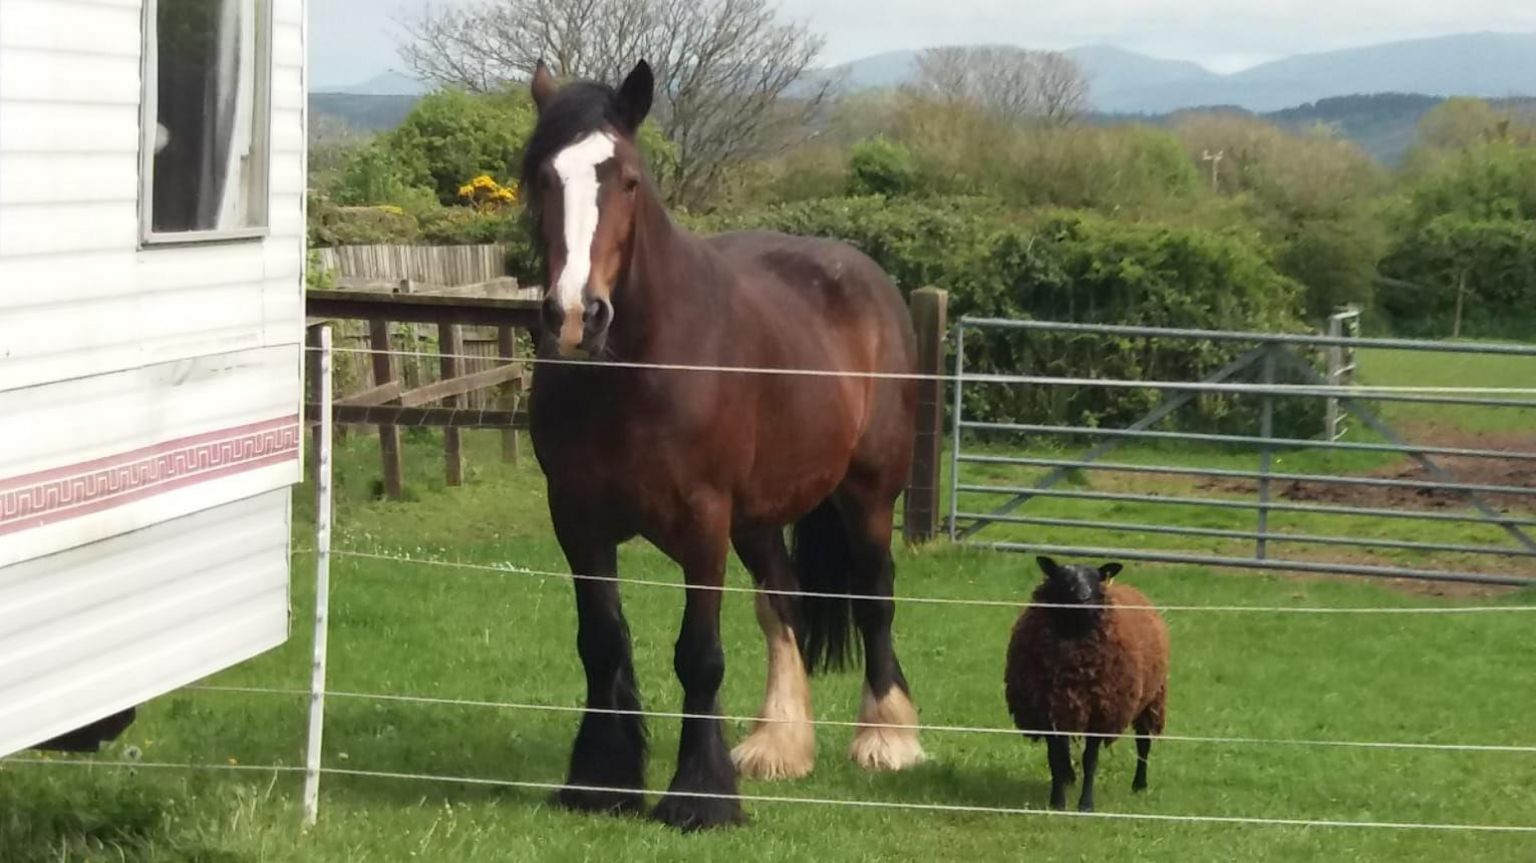 Jojo the shire horse standing by a fence with Hetty the black sheep